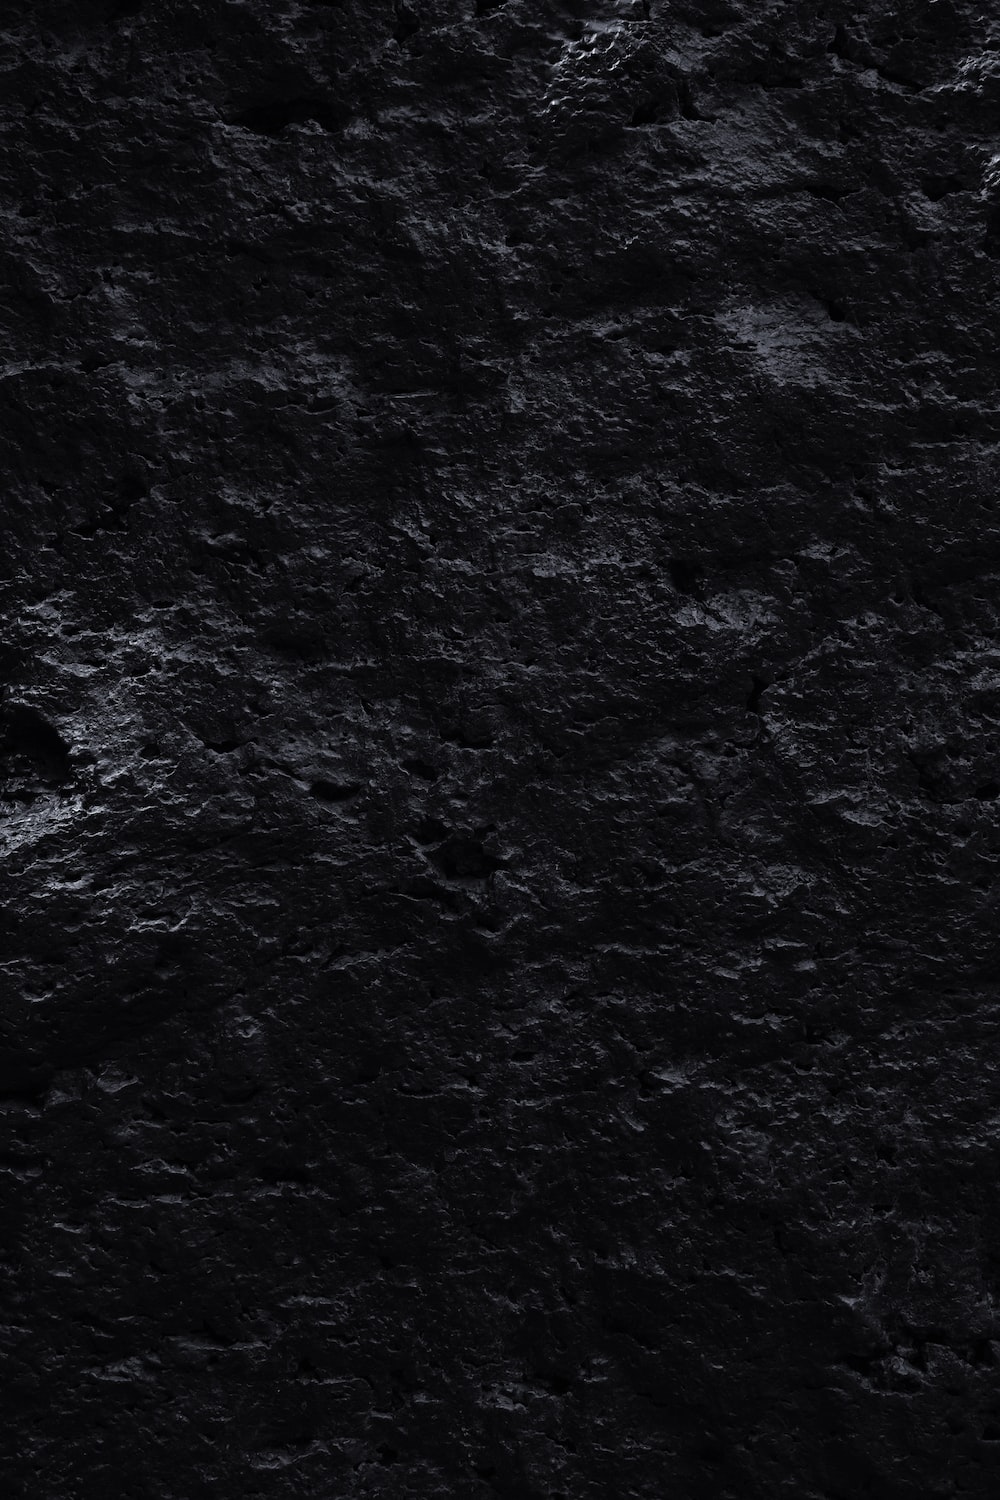 Dark stone pictures download free images on